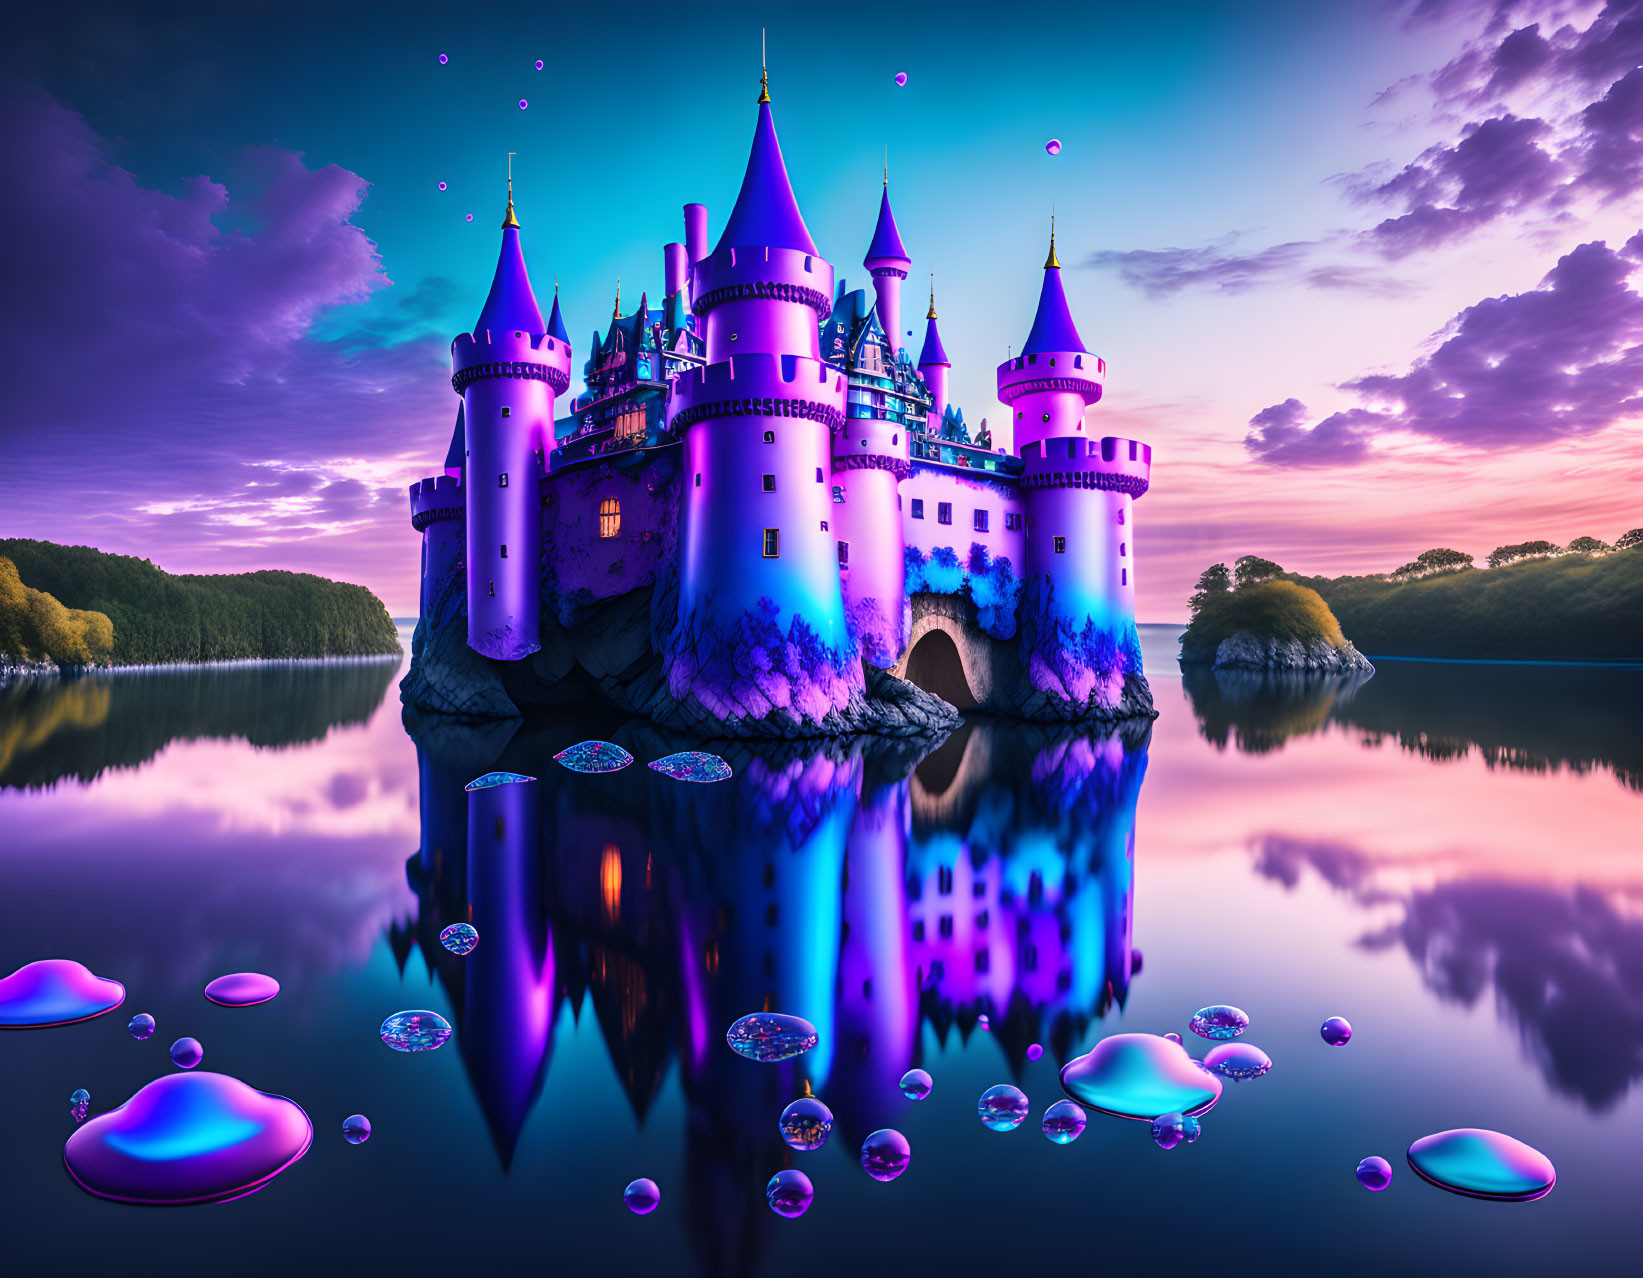 Purple Castle with Spires and Turrets Reflected in Tranquil Lake at Twilight